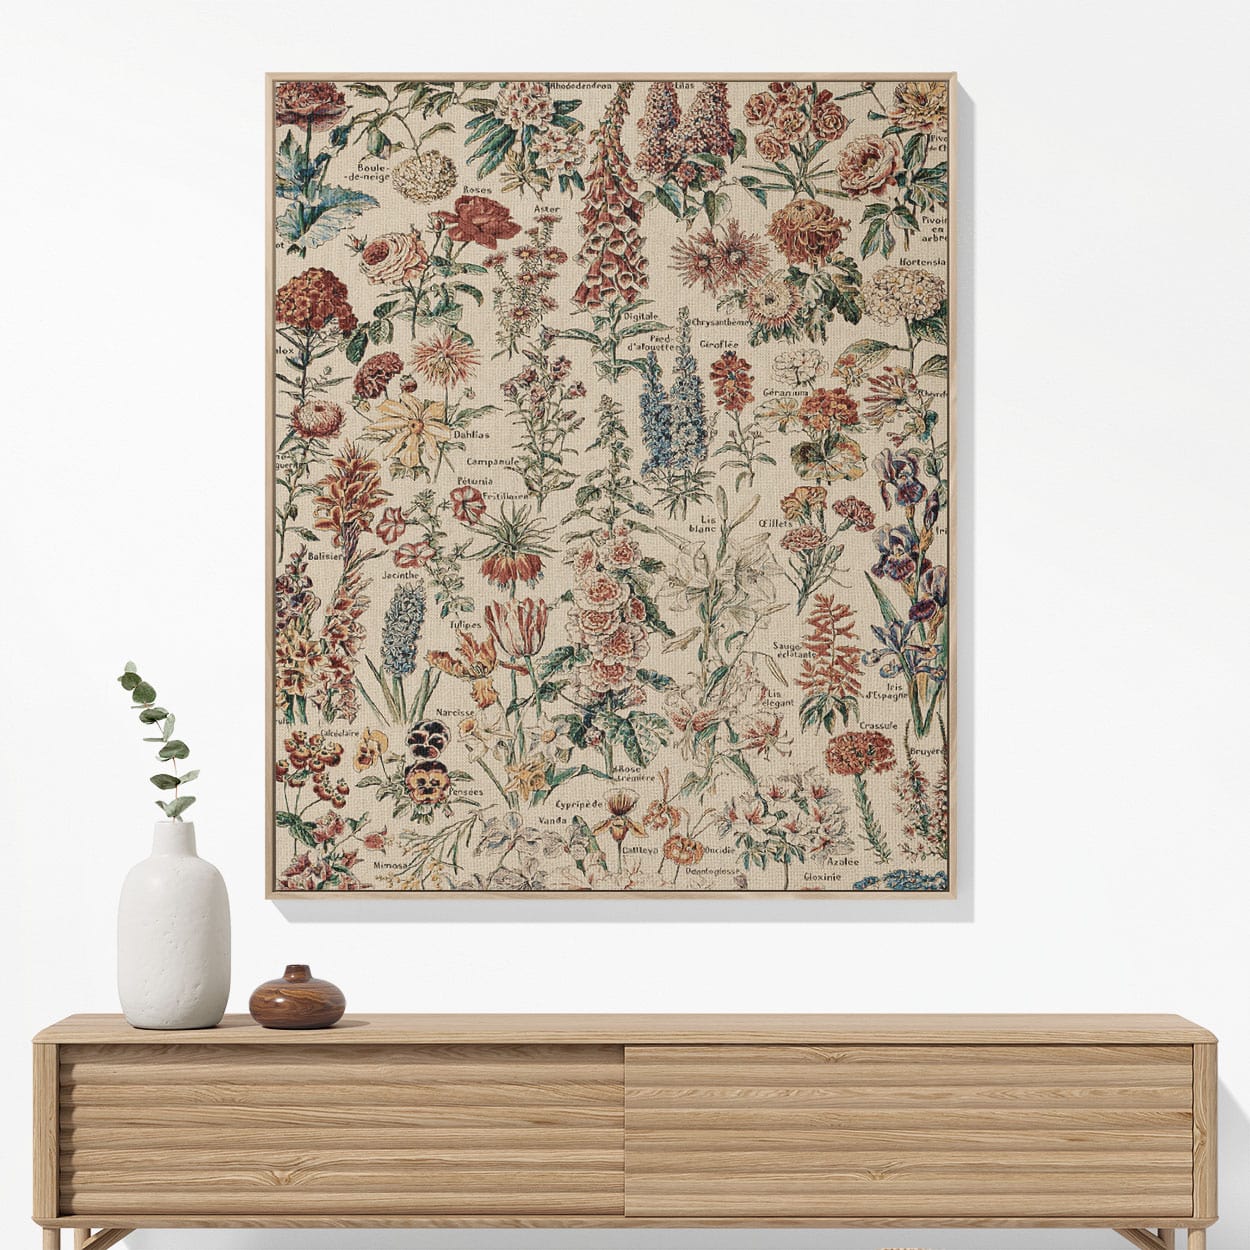 Flower Woven Blanket Woven Blanket Hanging on a Wall as Framed Wall Art